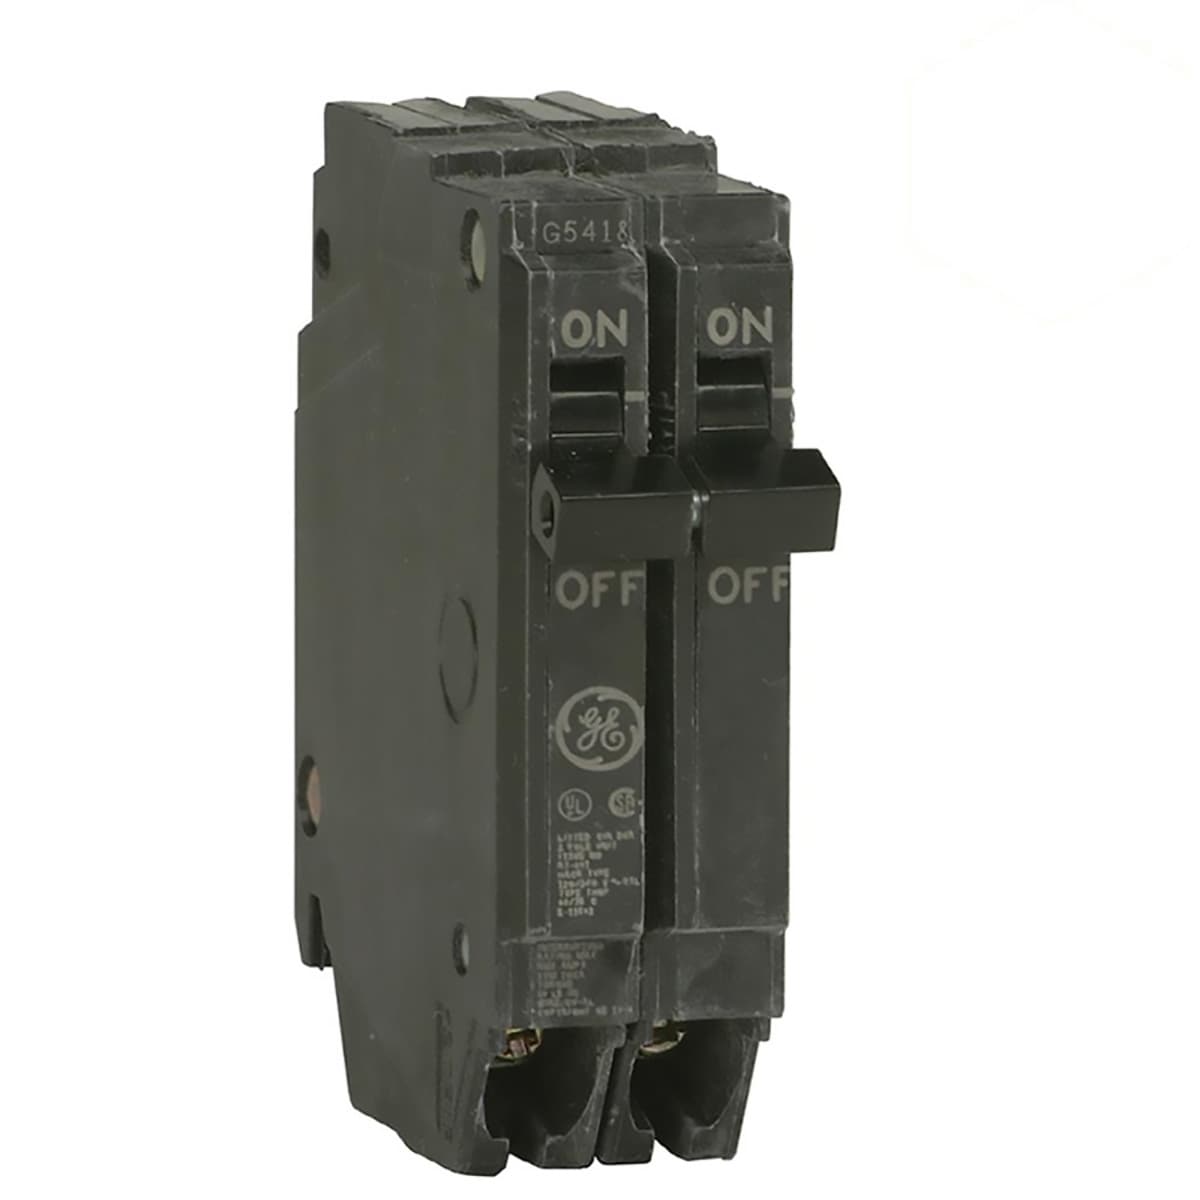 GENERAL ELECTRIC 40AMP 2 POLE THQP CIRCUIT BREAKER 